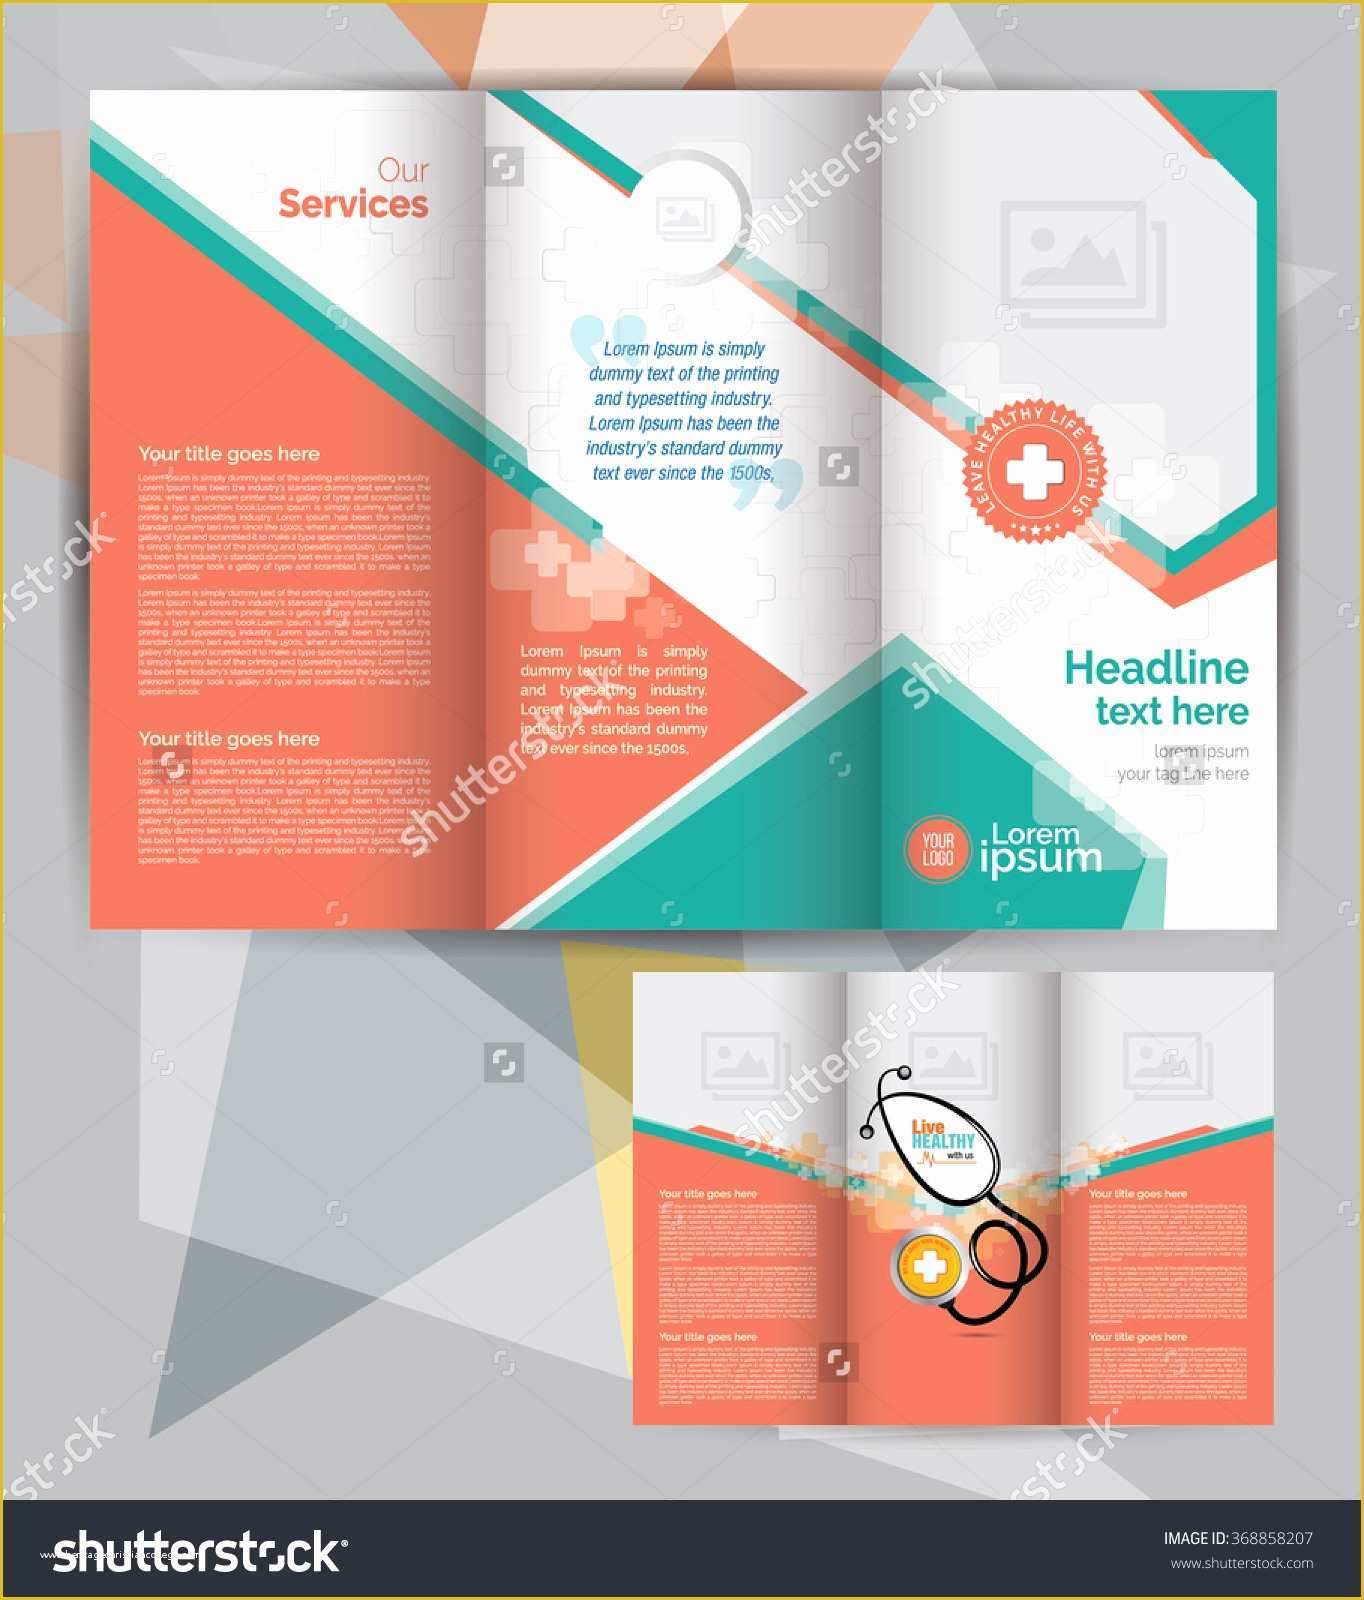 Free Downloadable Brochure Templates for Word Of Word Brochure Templates Free Portablegasgrillweber